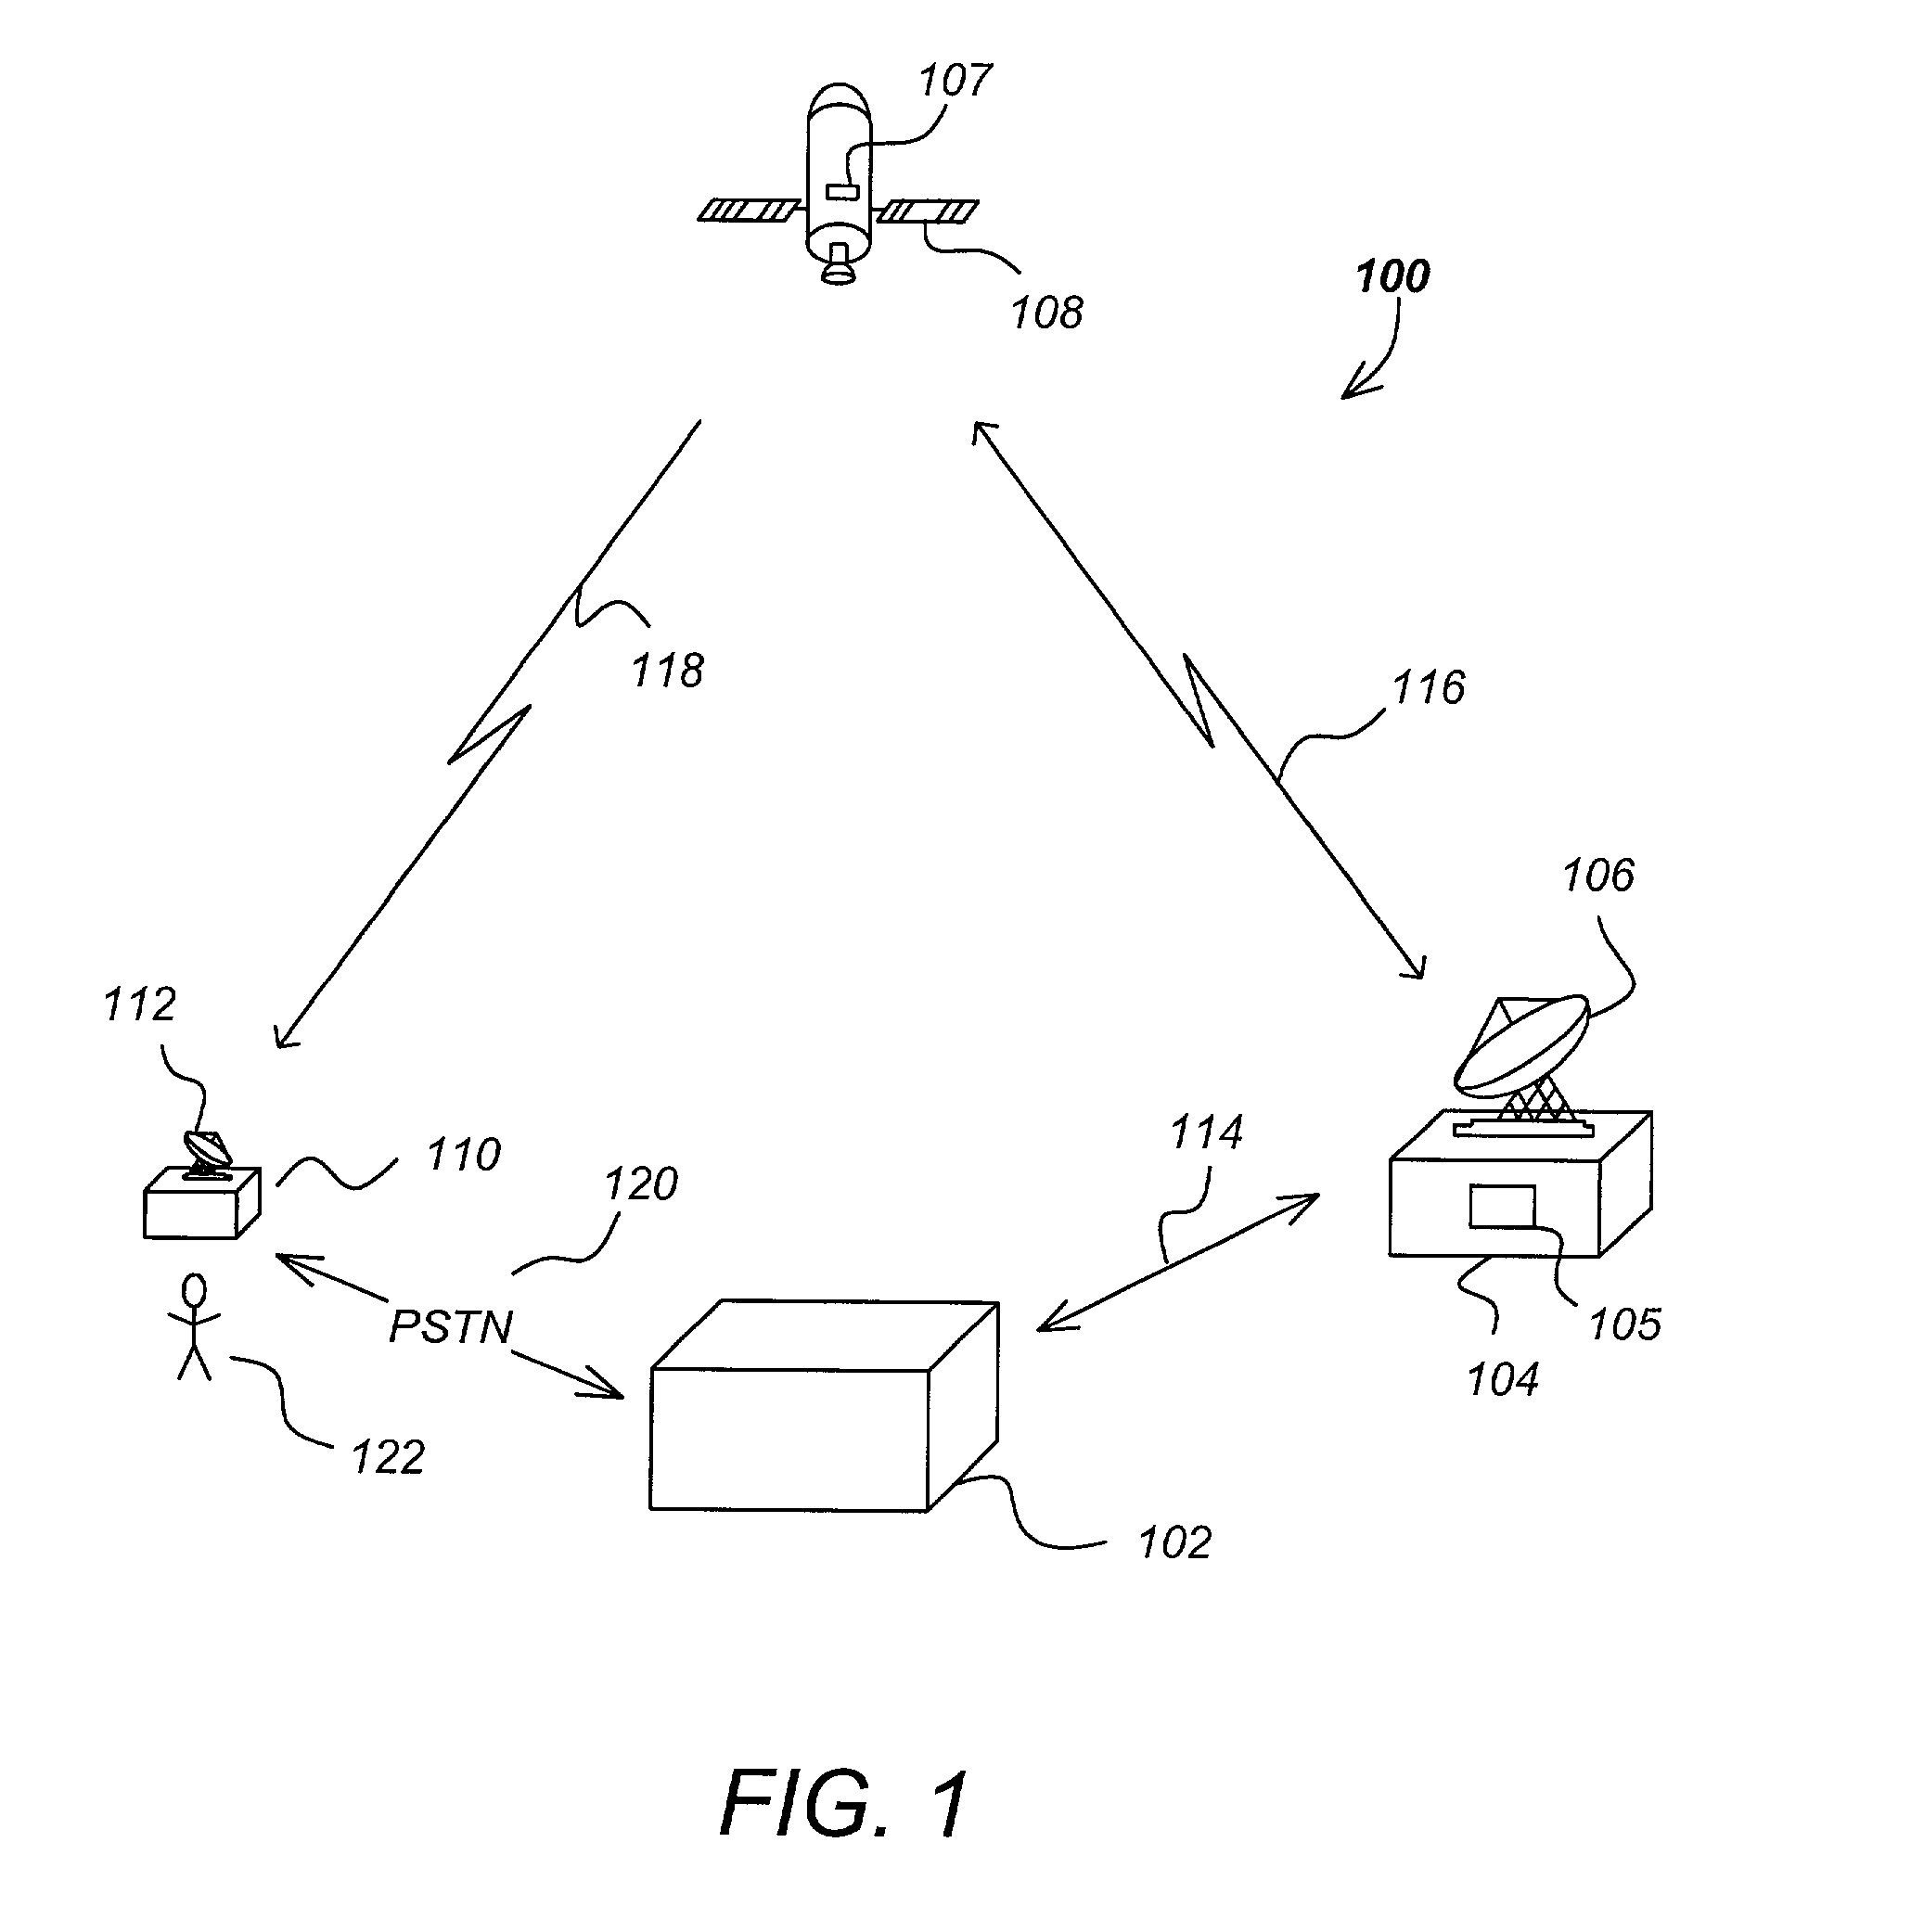 Pay-TV billing, system activation, and E-commerce using a pay-TV receiver